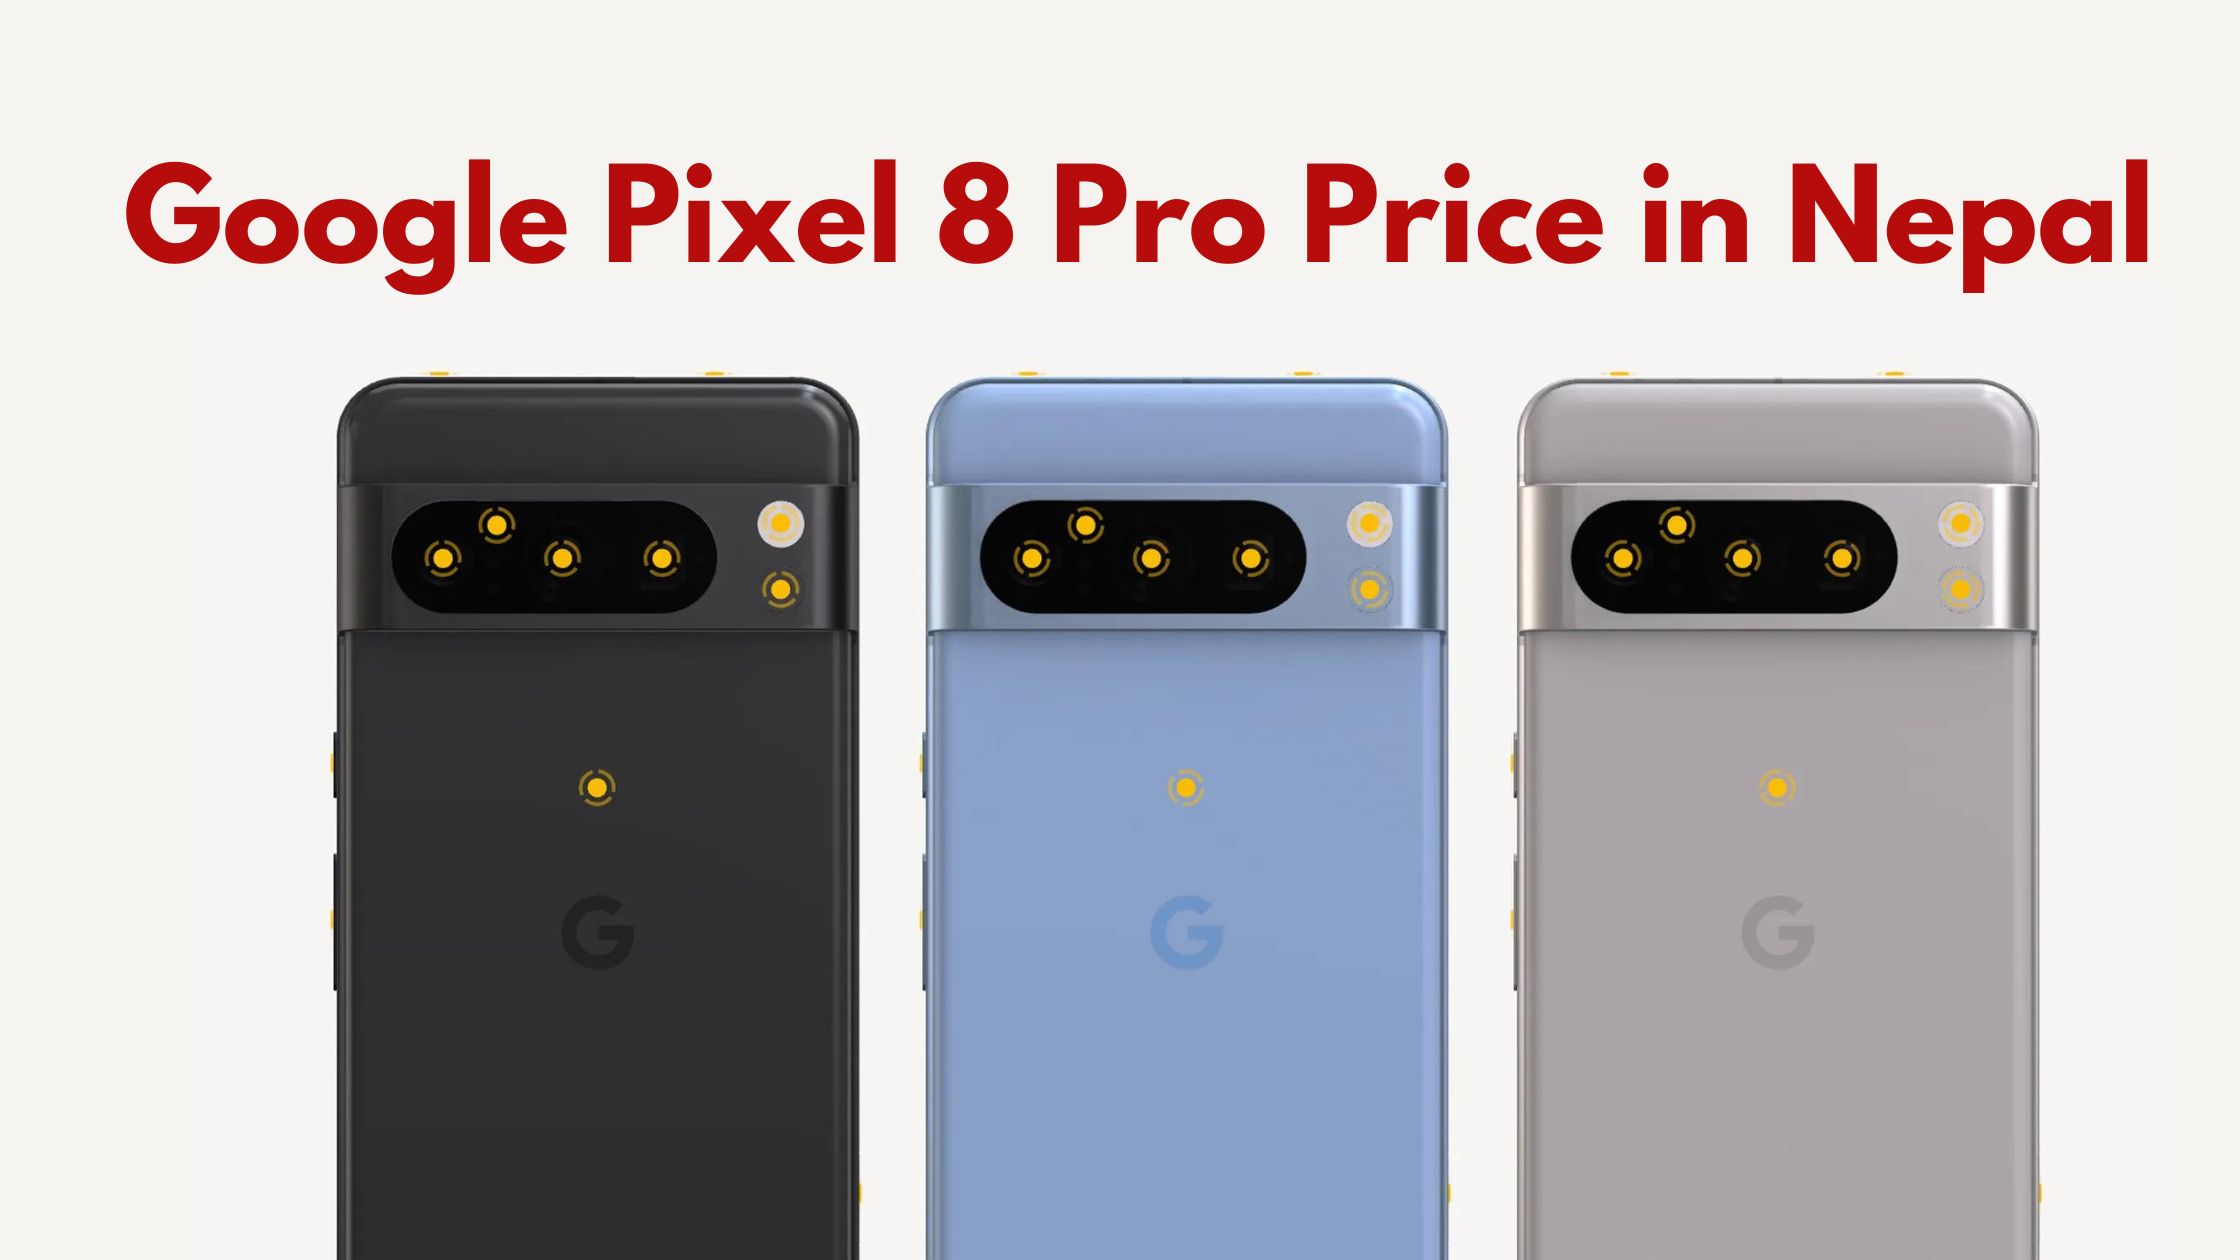 Google Pixel 8 Pro Price in Nepal And Availability Date